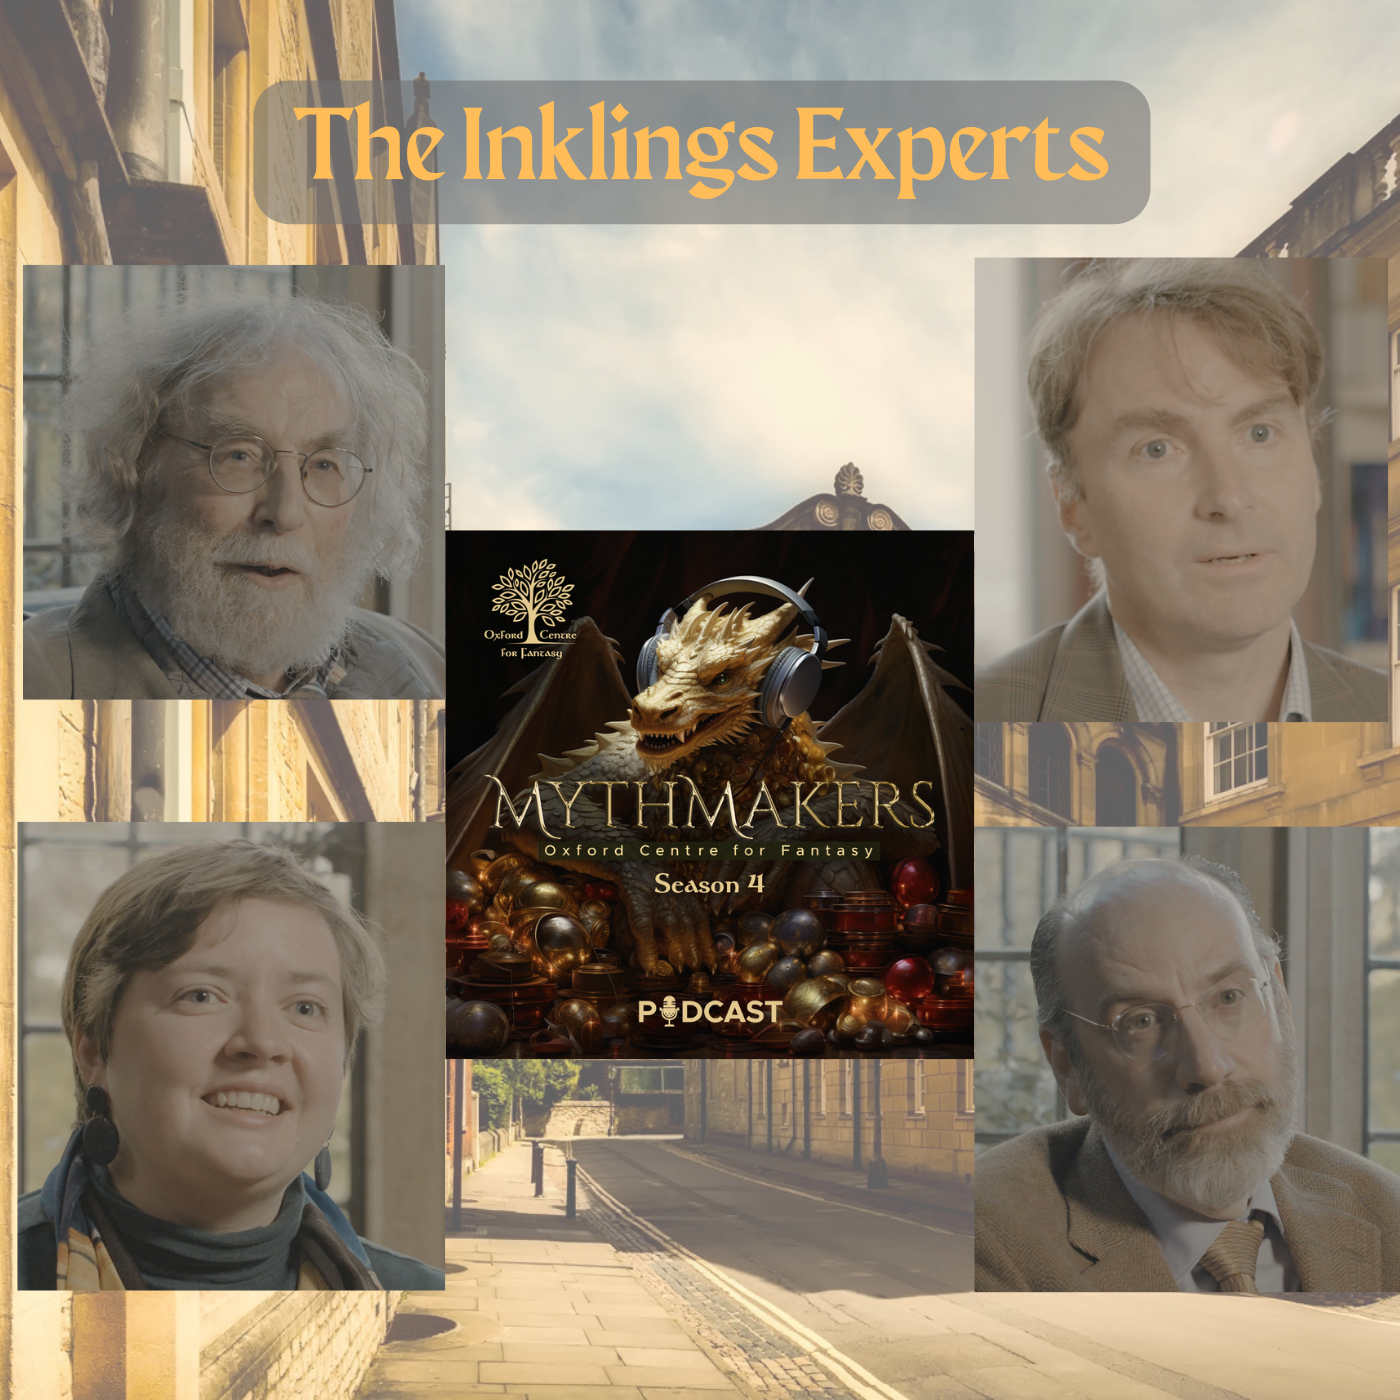 An Evening with the Inklings - Meet the Inklings Experts